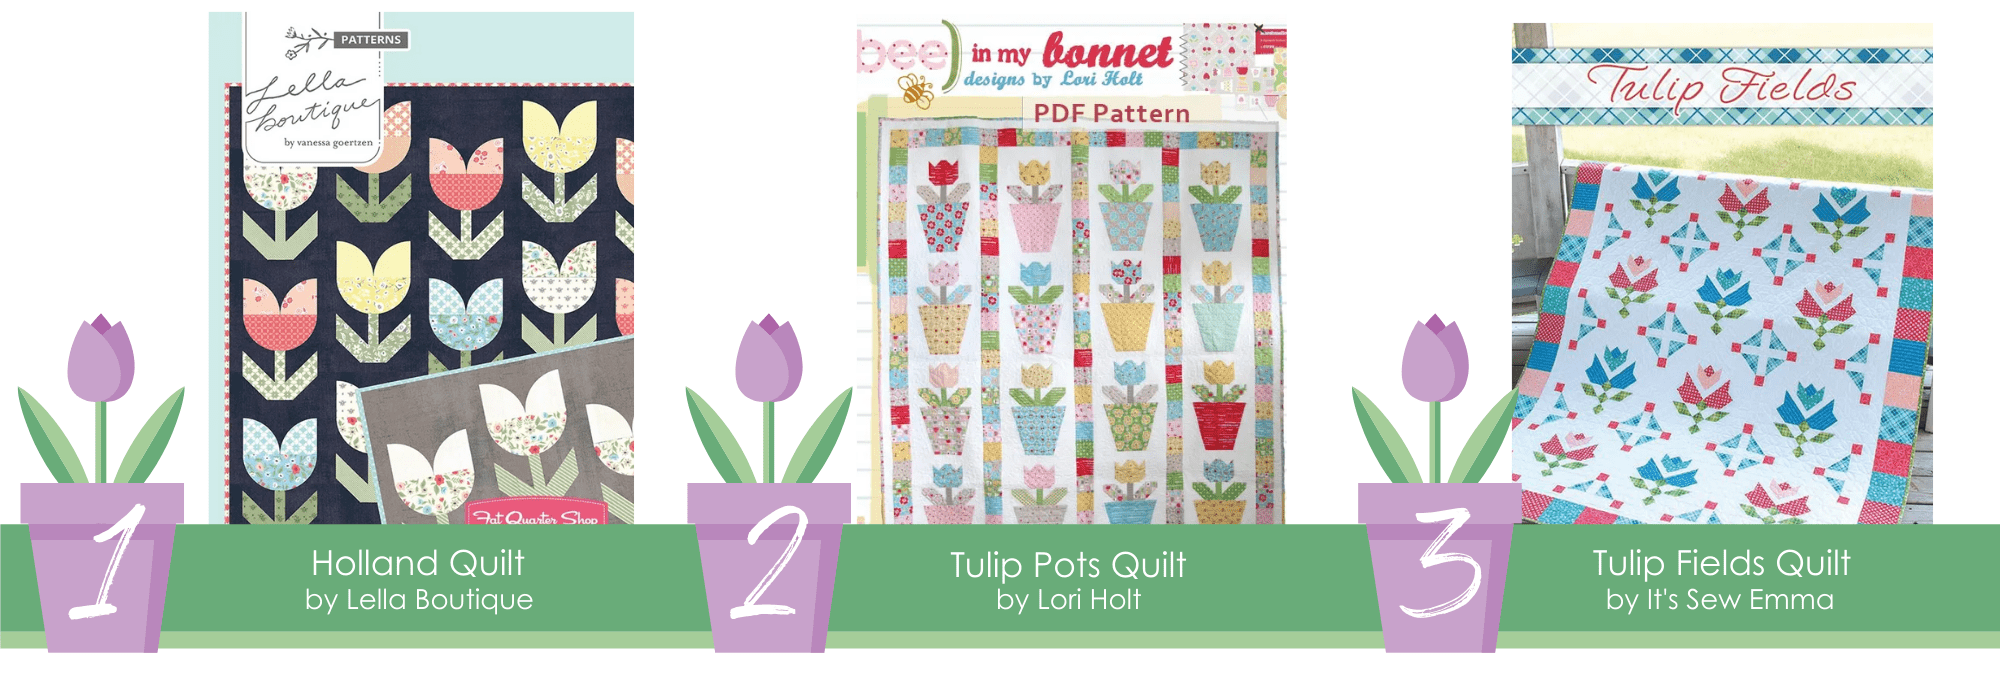 Tulip Quilt Patterns for Spring 1-3